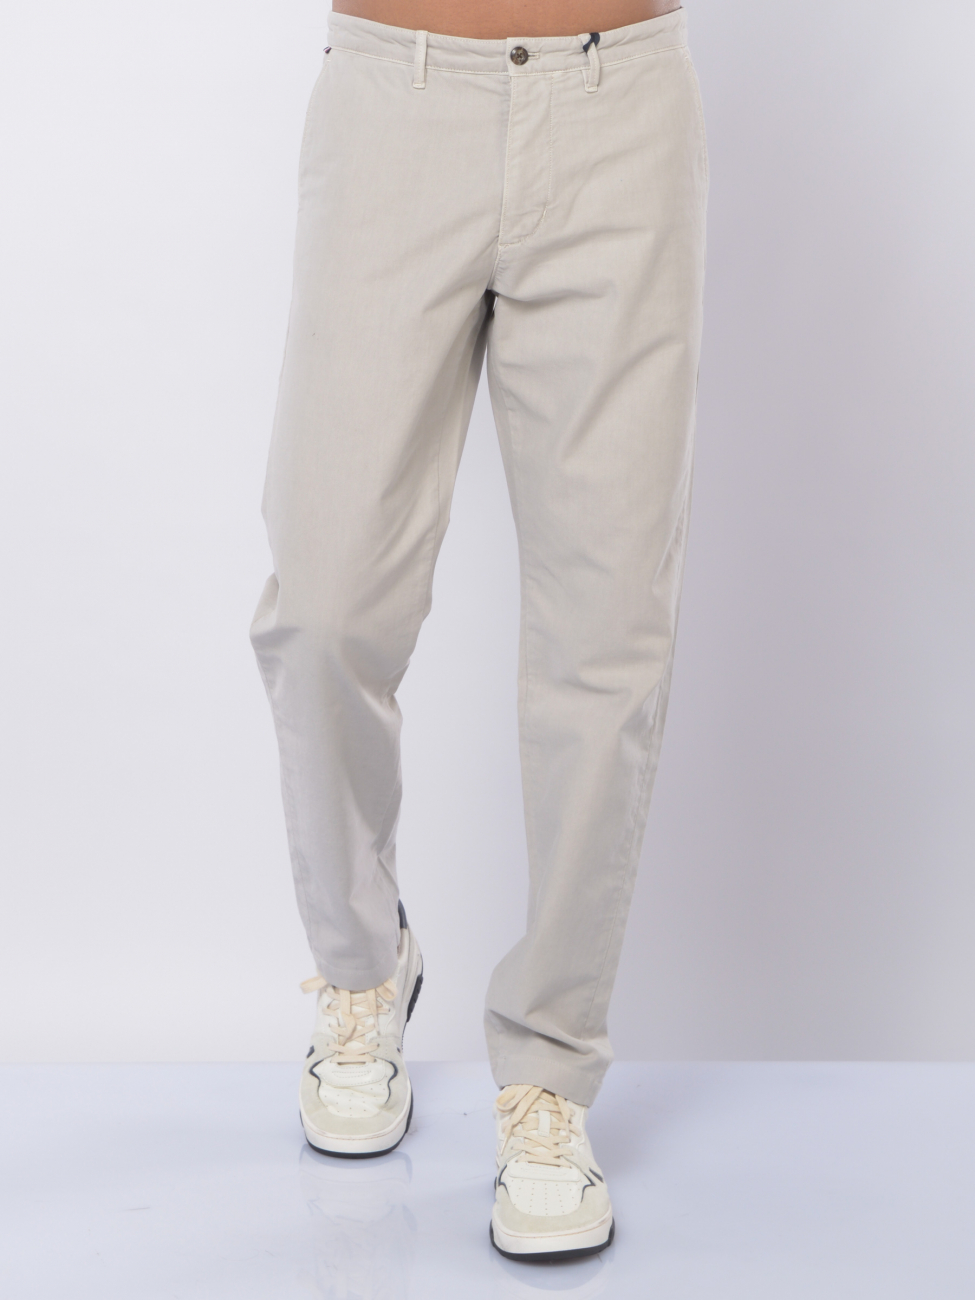 pantalone da uomo Tommy Hilfiger chino con relaxed tapered fit